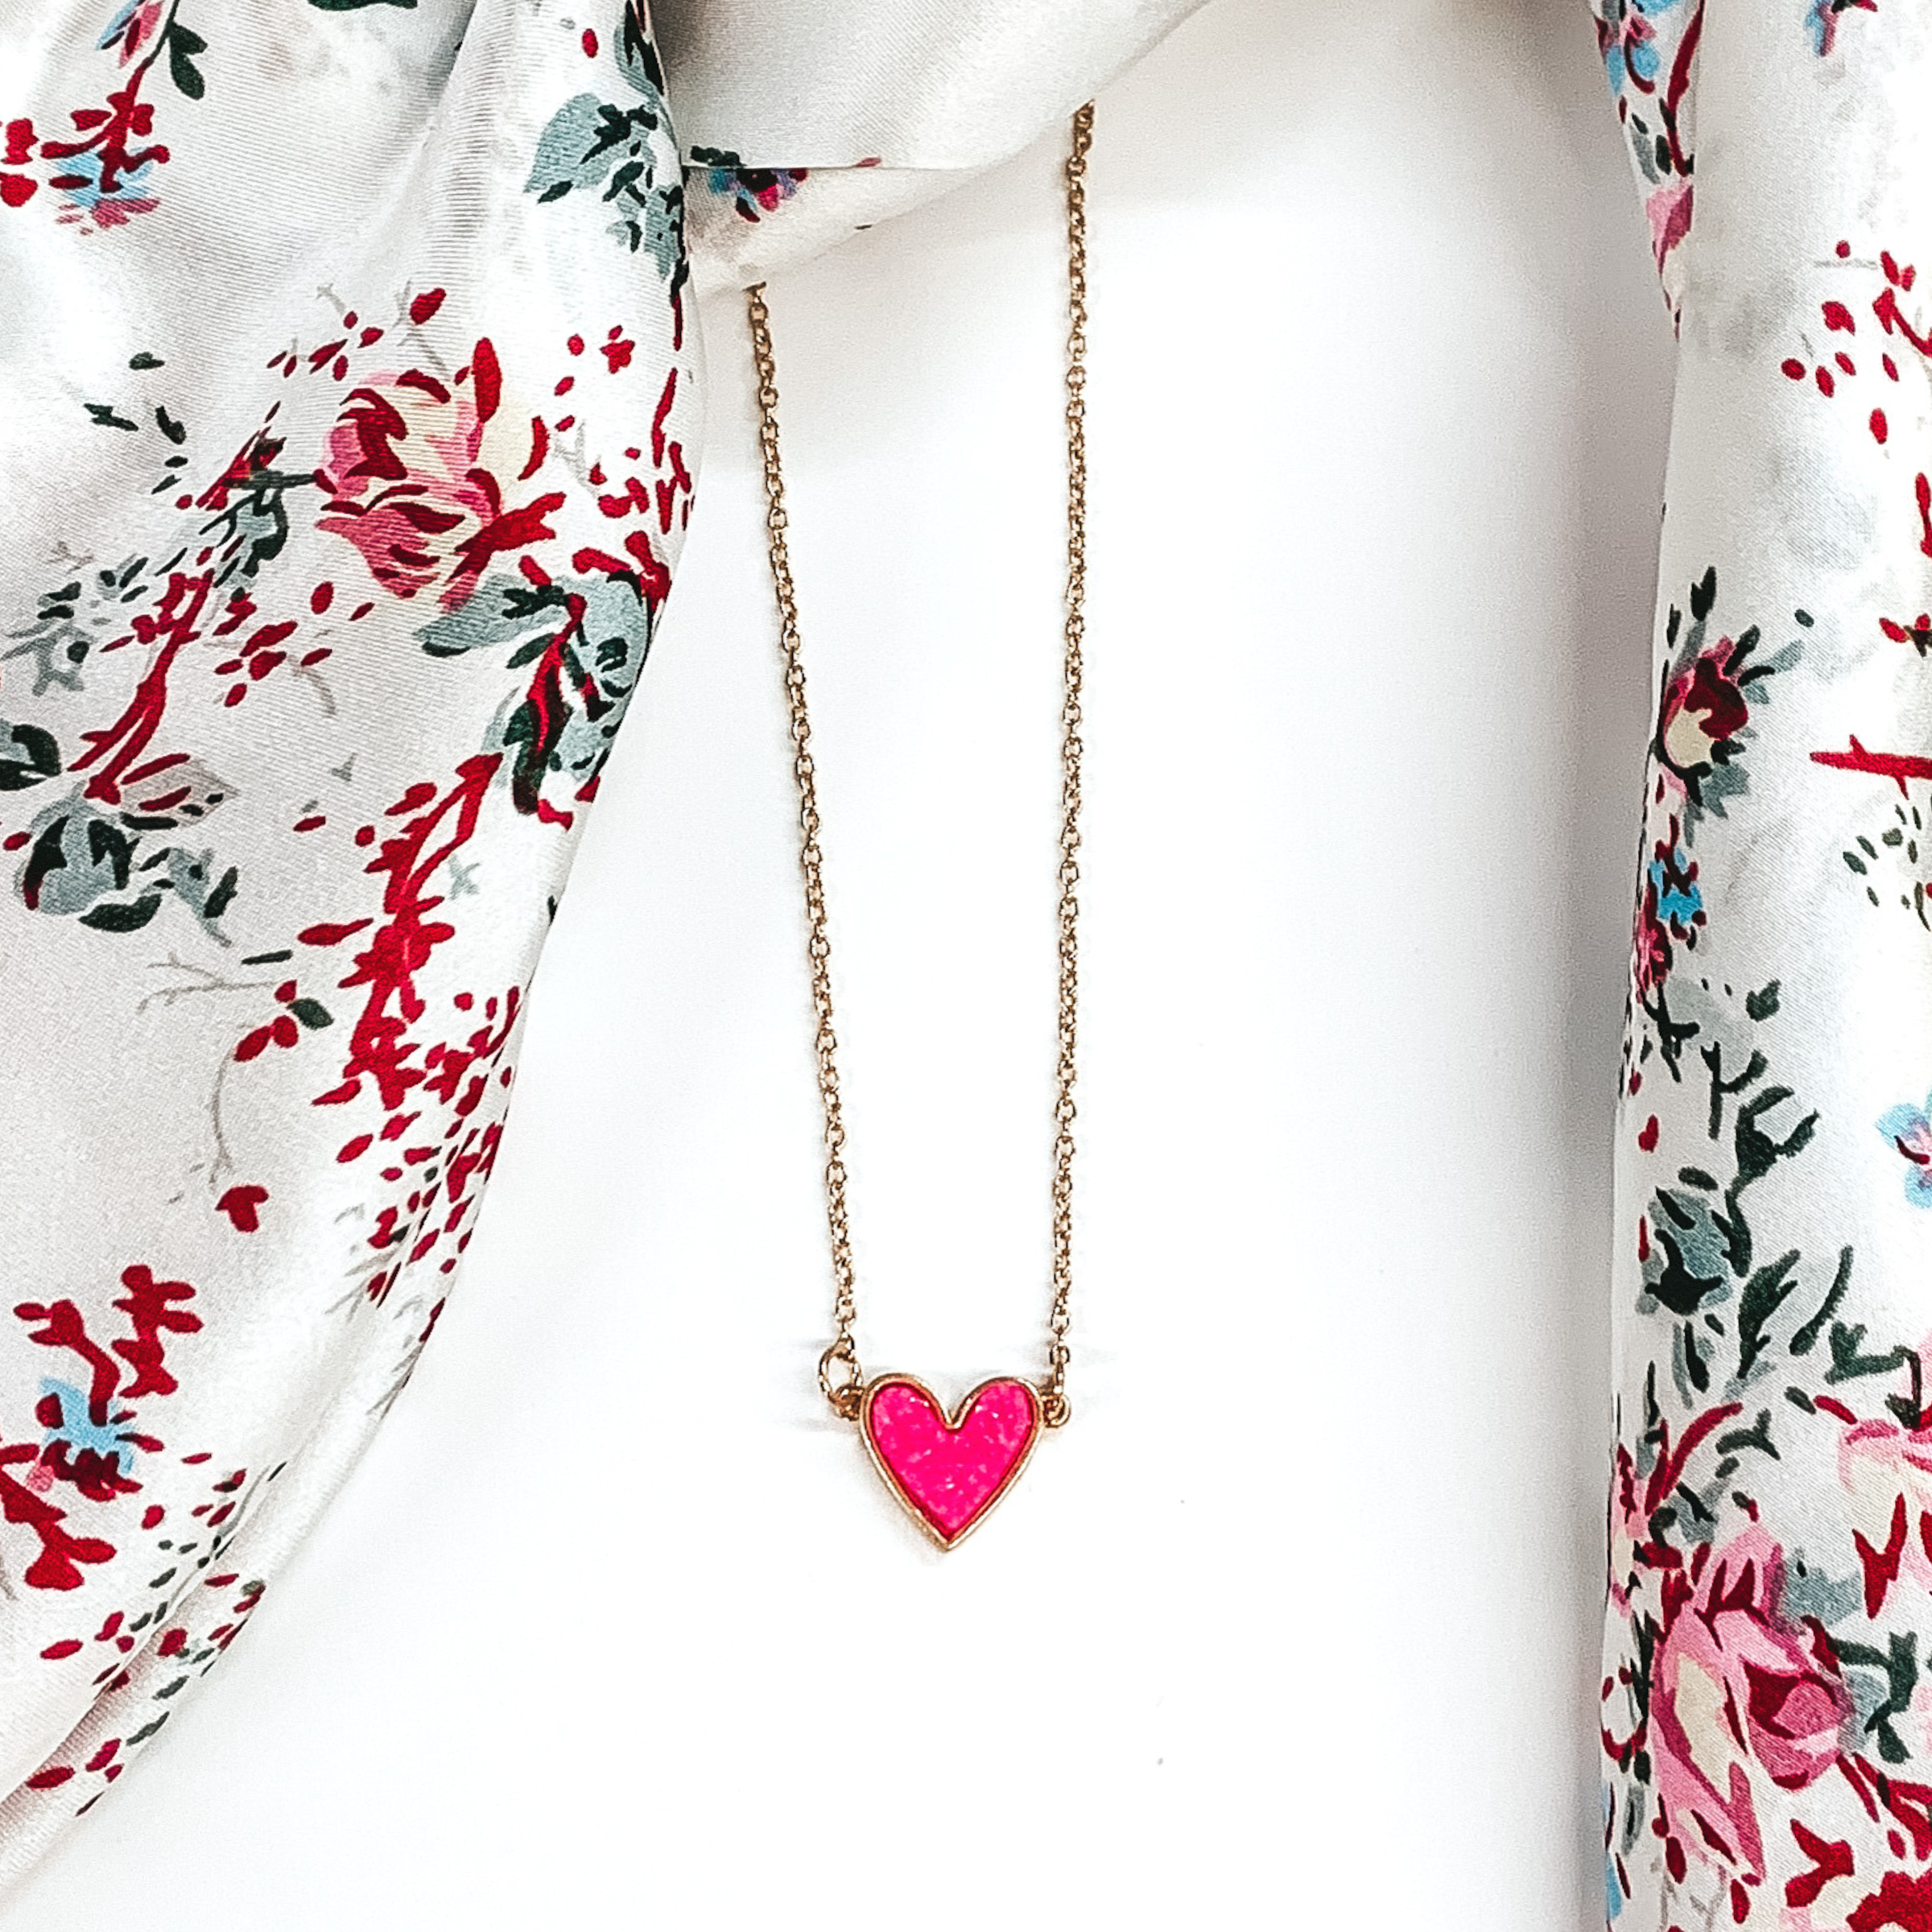 Small, gold chained necklace with a pink colored druzy heart pendant. This necklace is pictured on a white background with a white rag with colored flowers laying above the necklace.